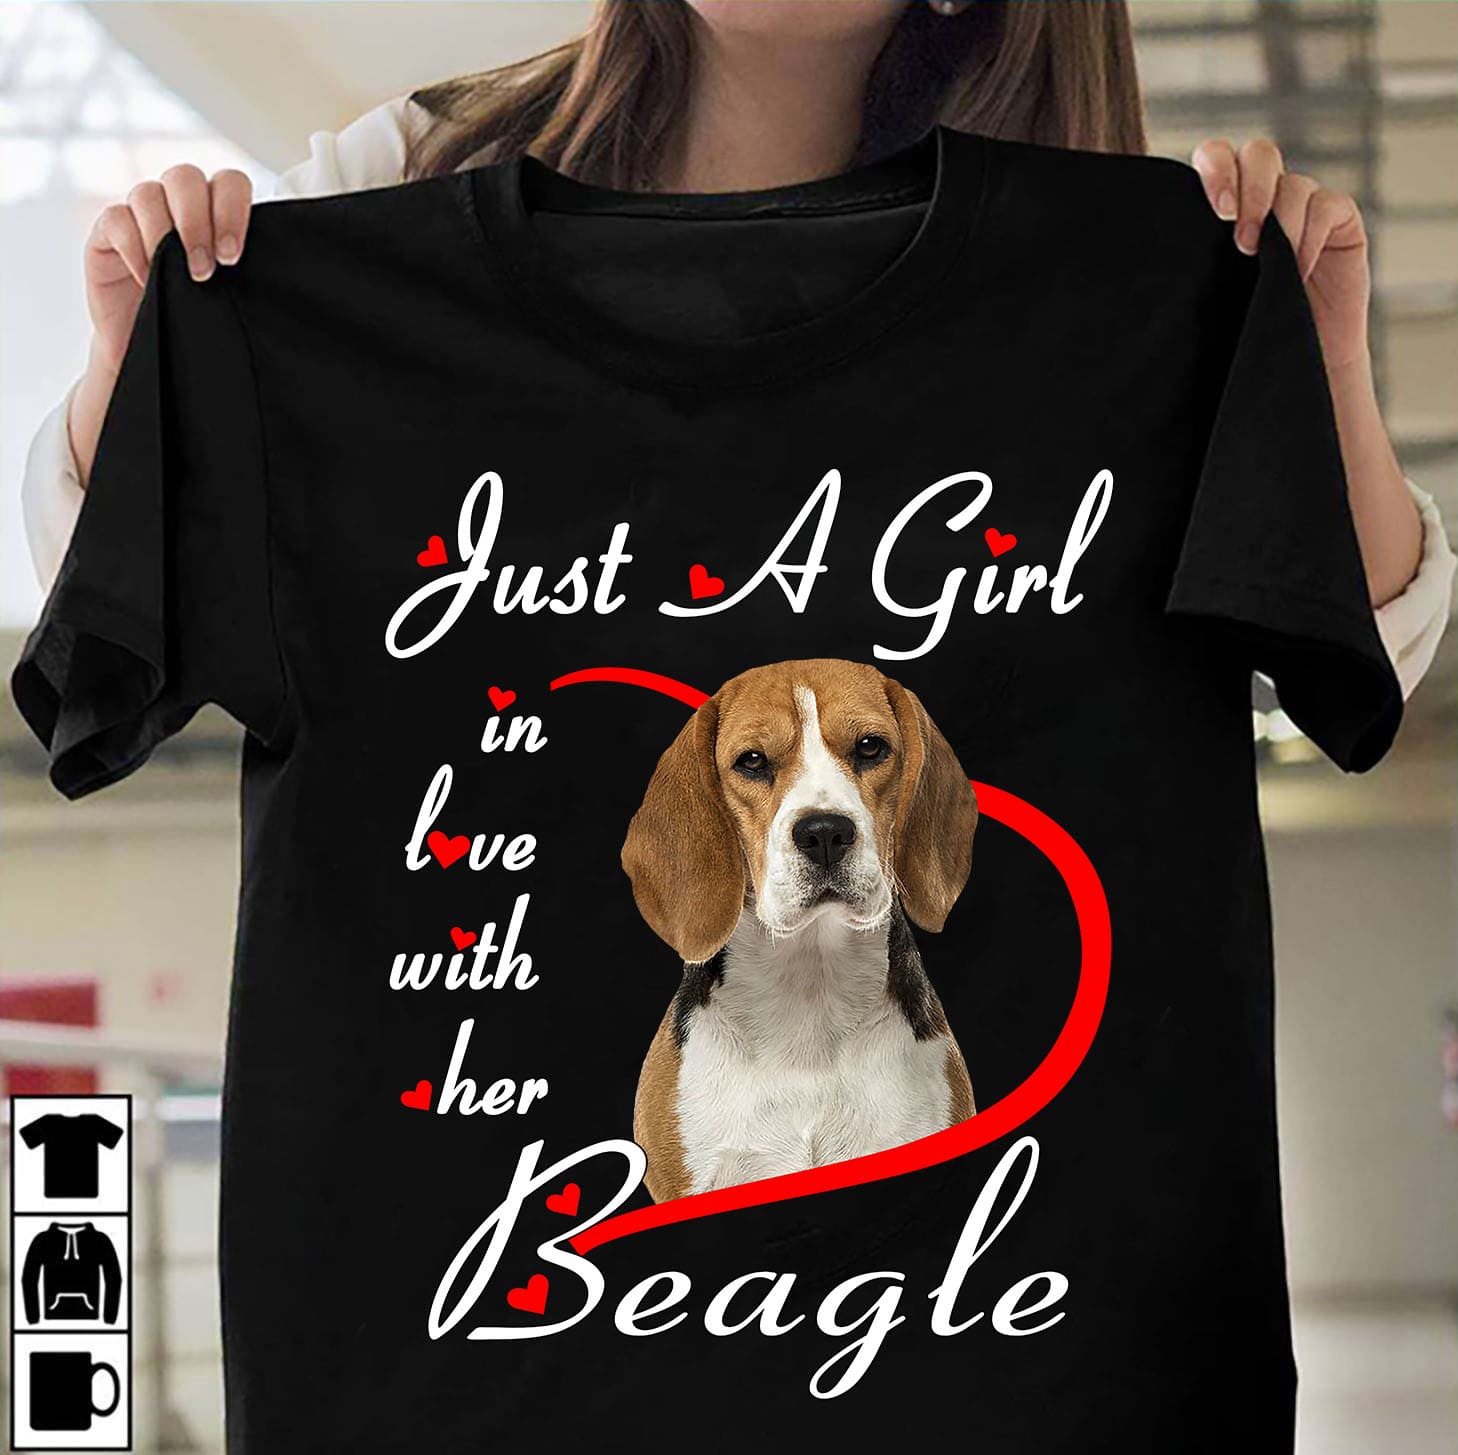 Just a girl in love with her beagle - Girl loves beagle dog, Beal dog graphic T-shirt